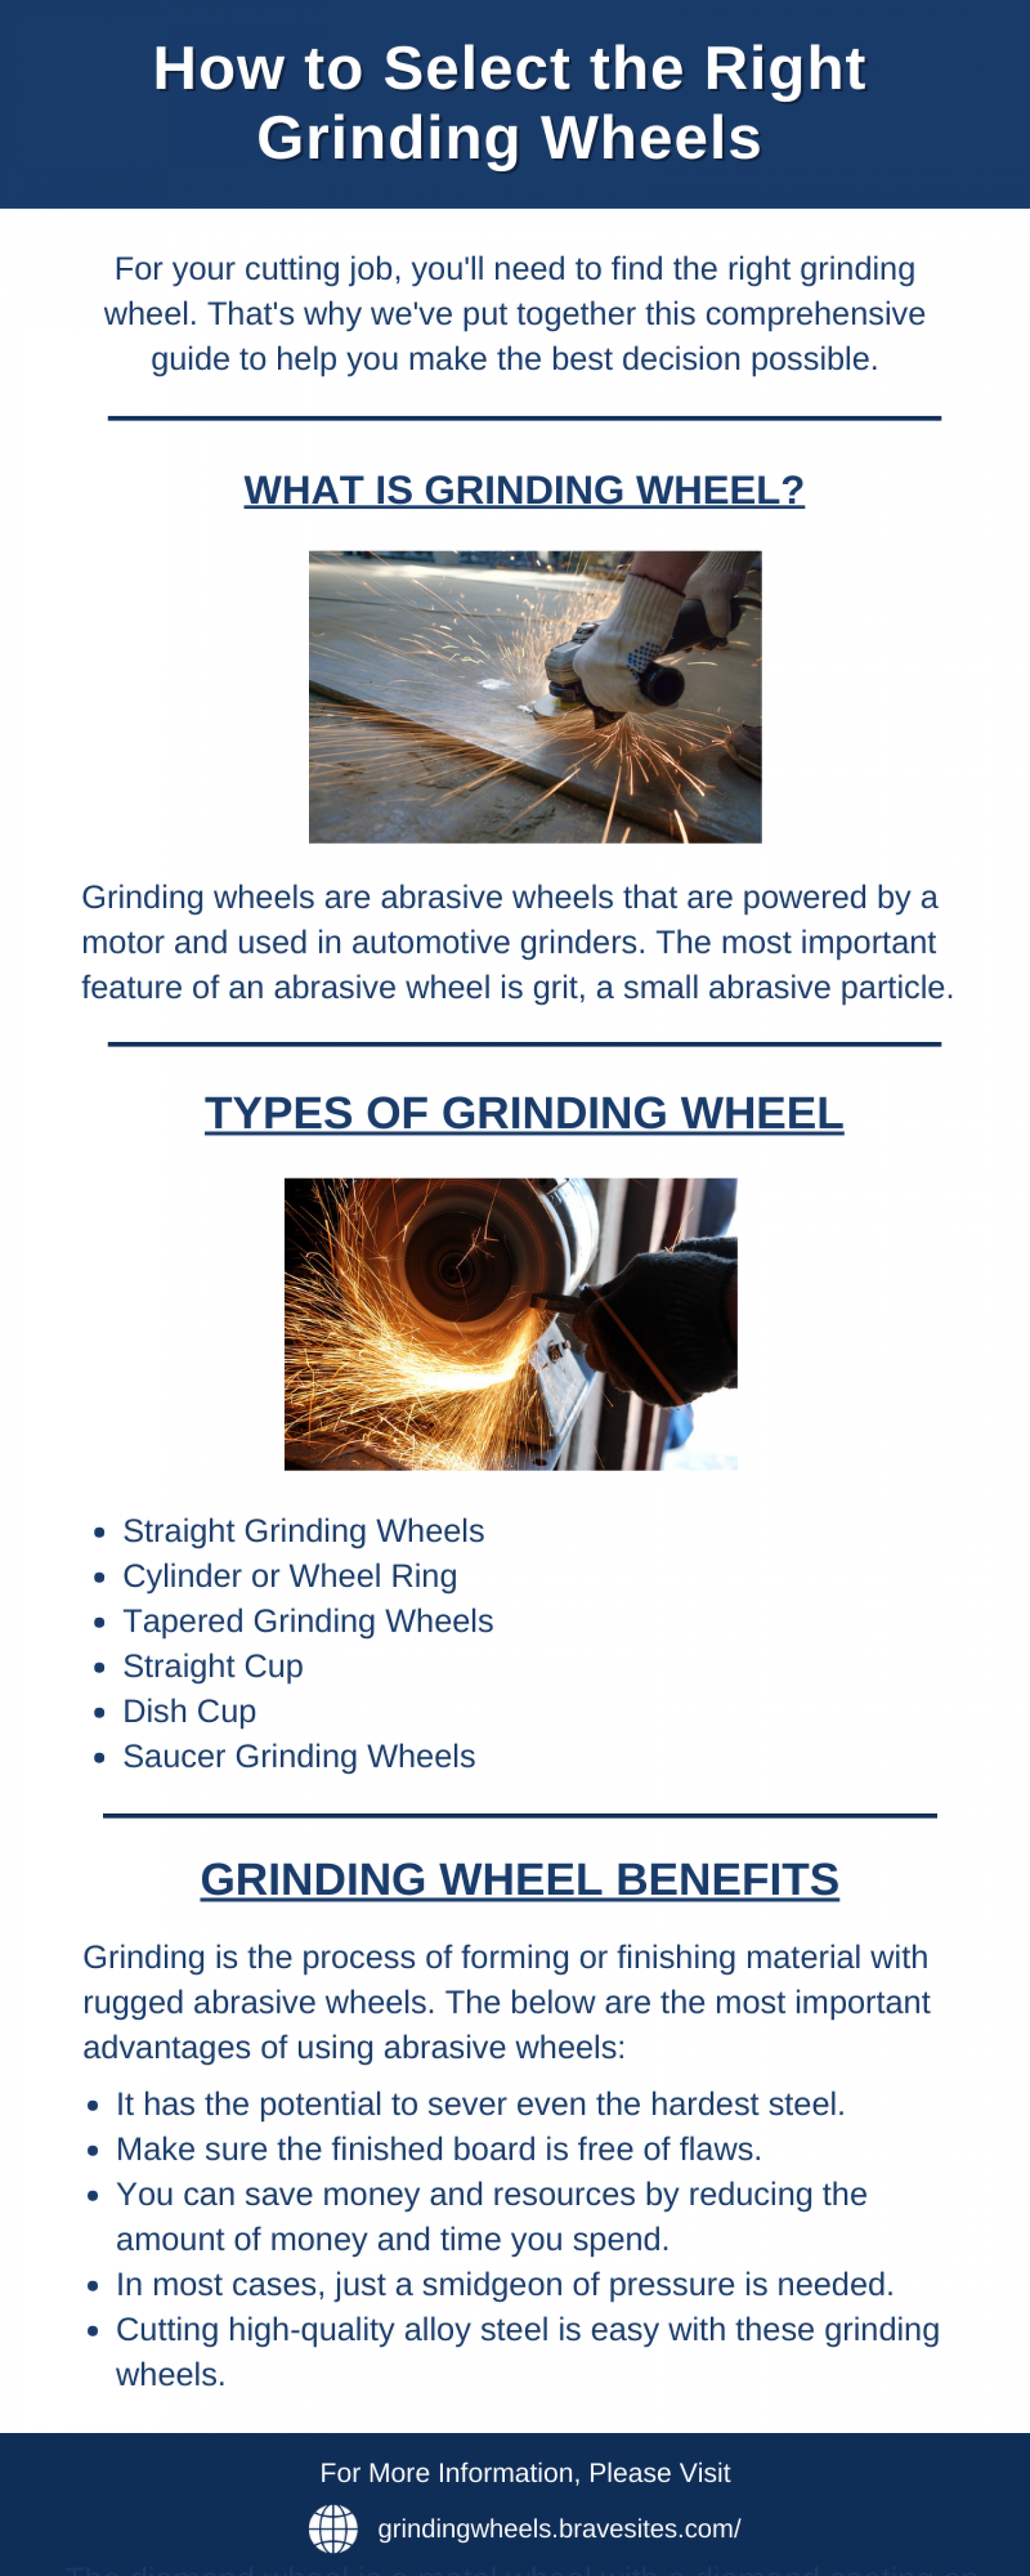 How to Select the Right Grinding Wheels Infographic